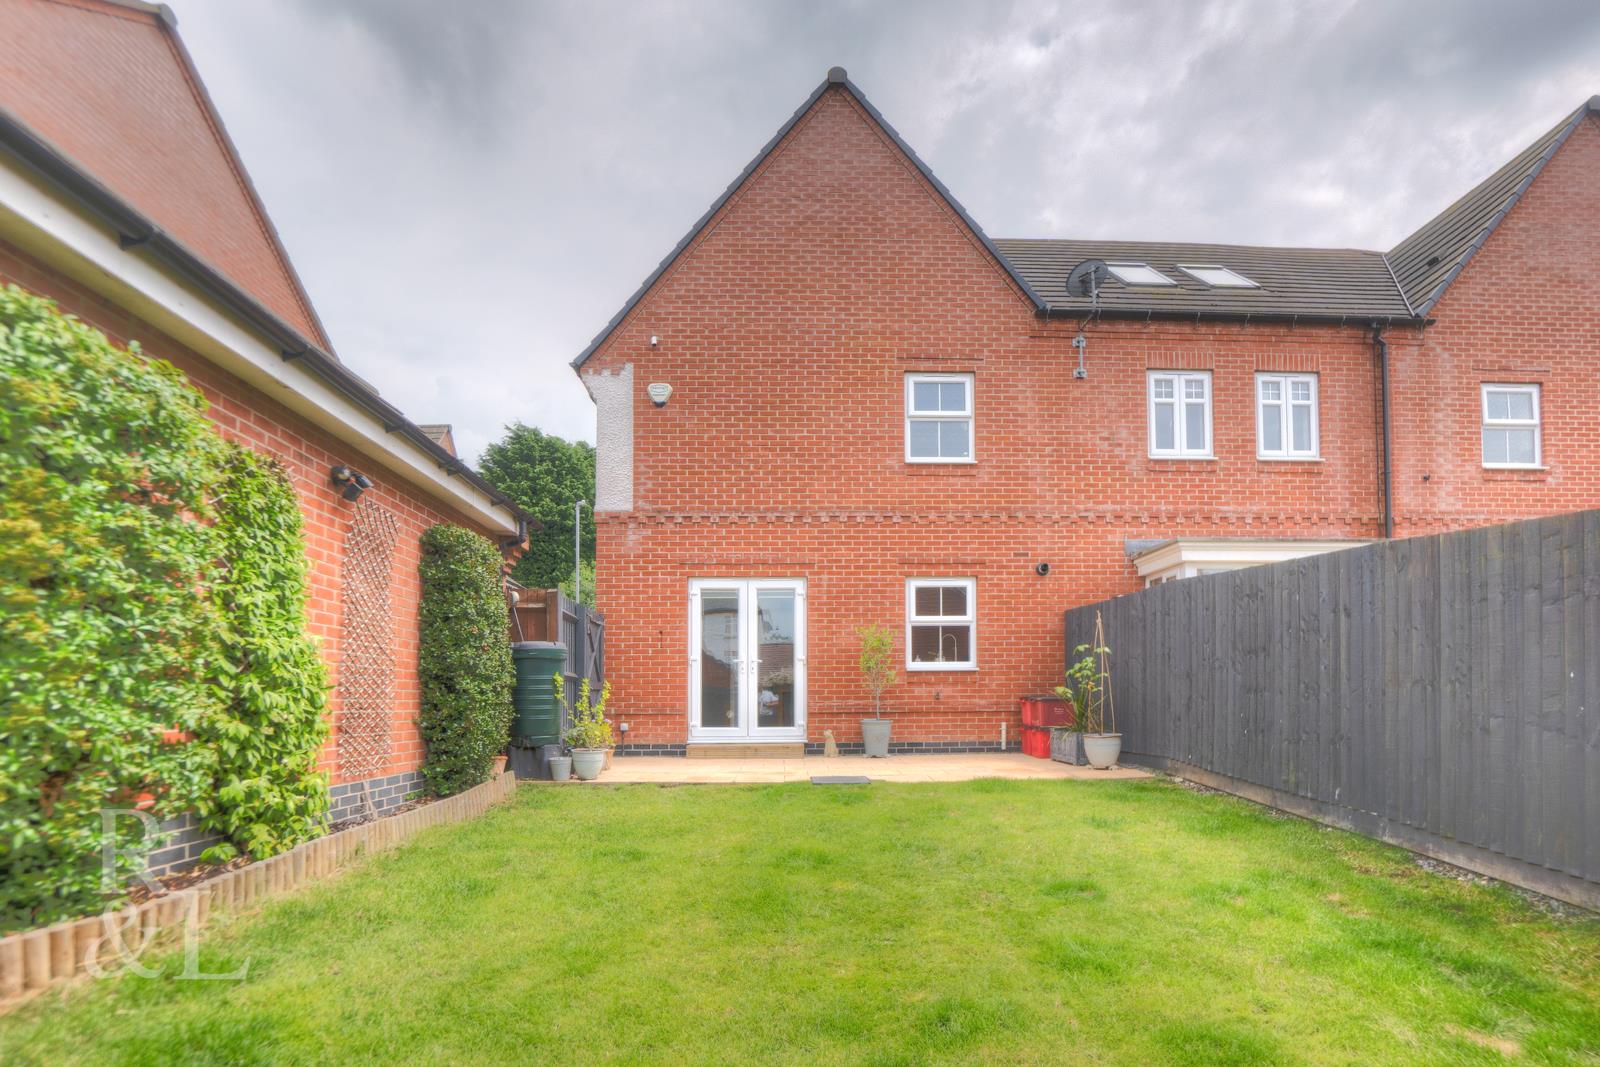 Property image for Isaac Grove, Ashby-De-La-Zouch